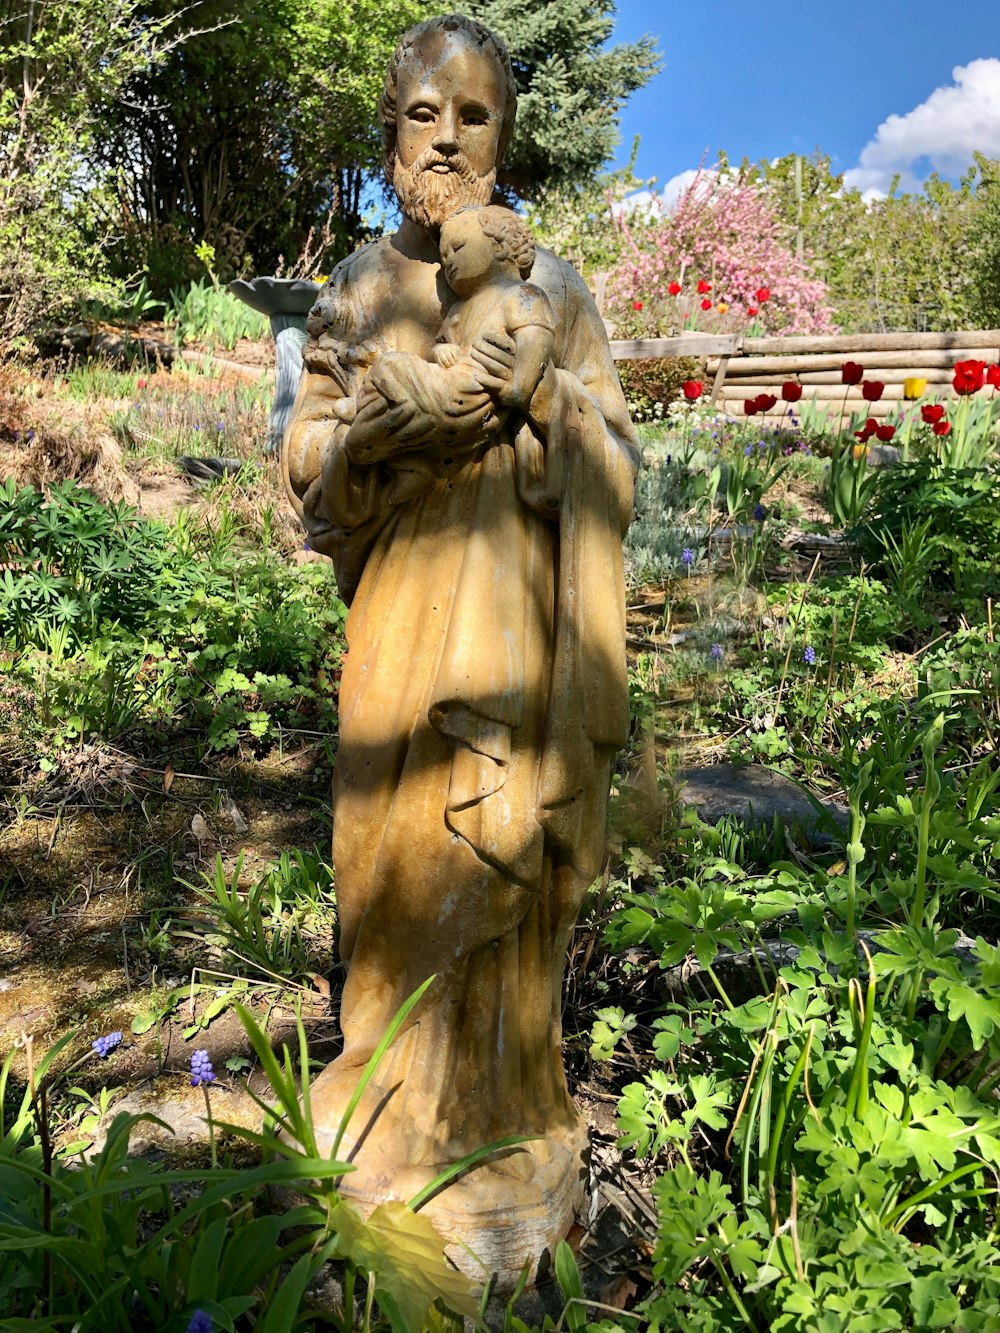 a statue of a person holding a cat in a garden